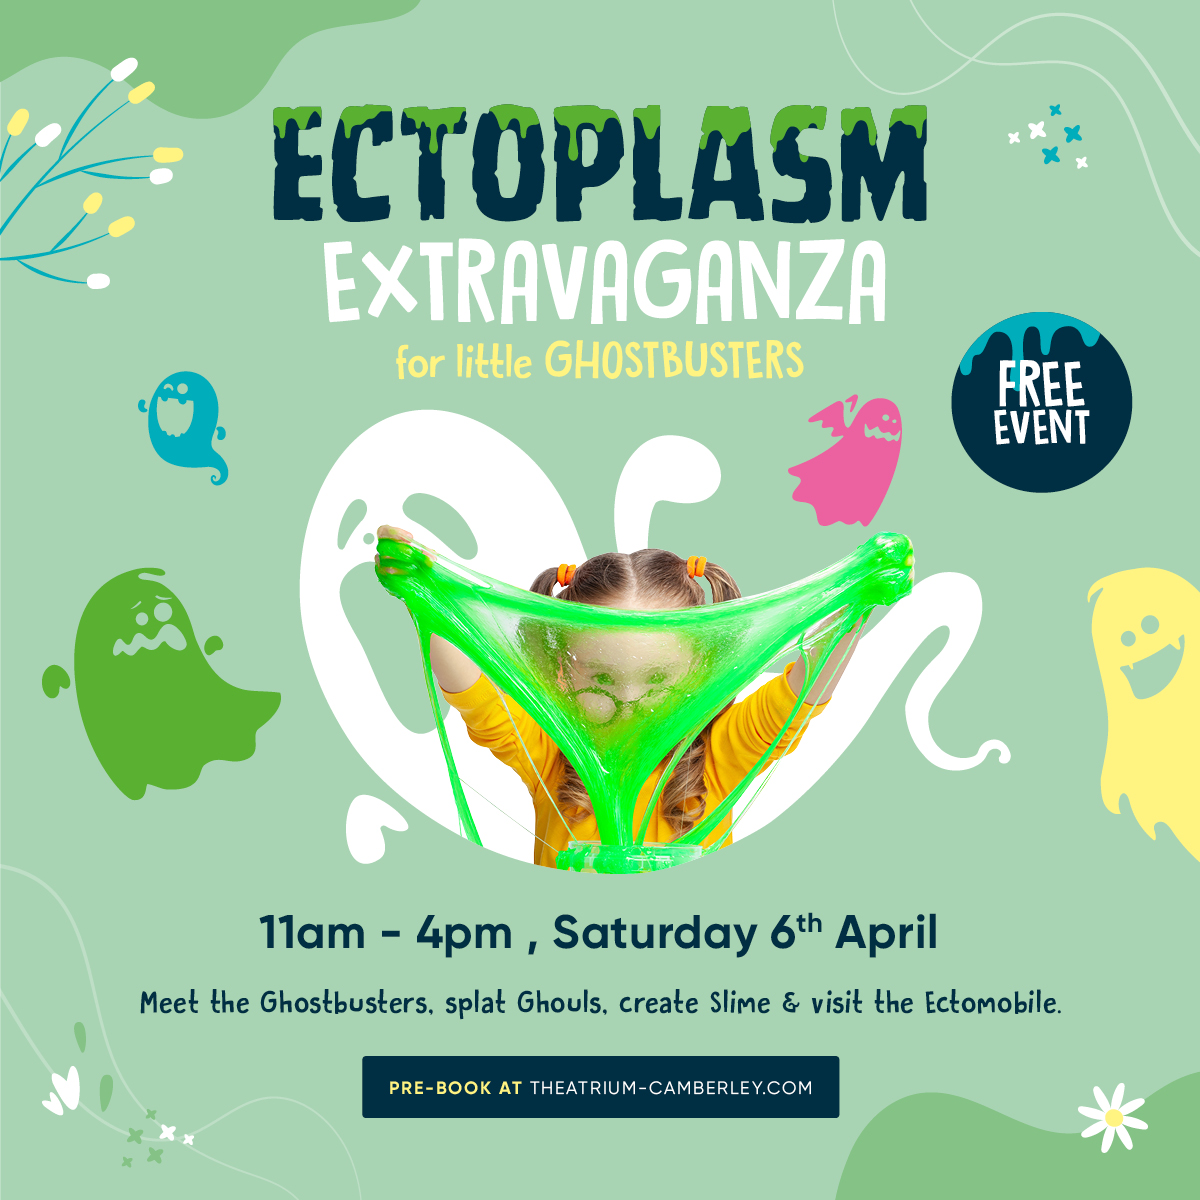 📅 Date: Saturday, 6th April 🕚 Time: 11am - 4pm 📍 Location: The Atrium, Camberley Be the first to secure your tickets by signing up to The Atrium mailing list! Don't forget to specify your preference as 'KIDS'. loom.ly/mZjnSKI #LoveCamberley